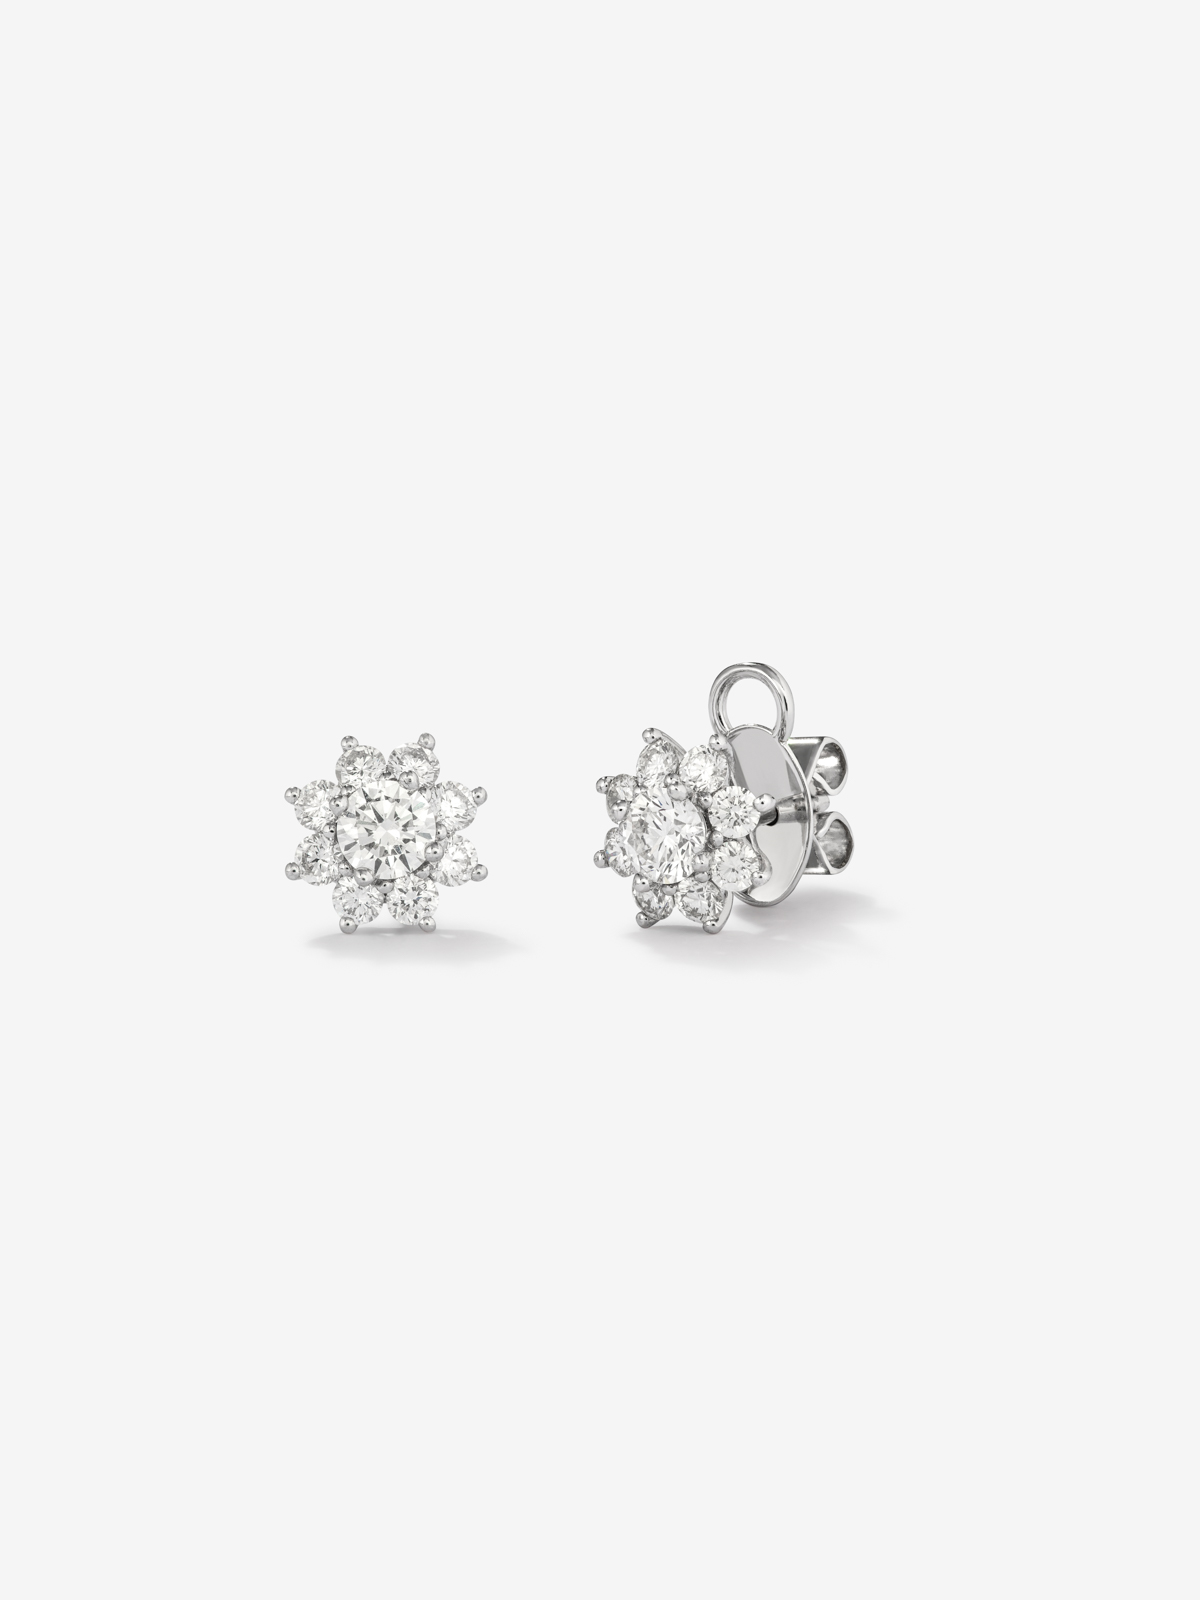 18K white gold earrings with diamonds in bright size of 0.57 CTS star -shaped